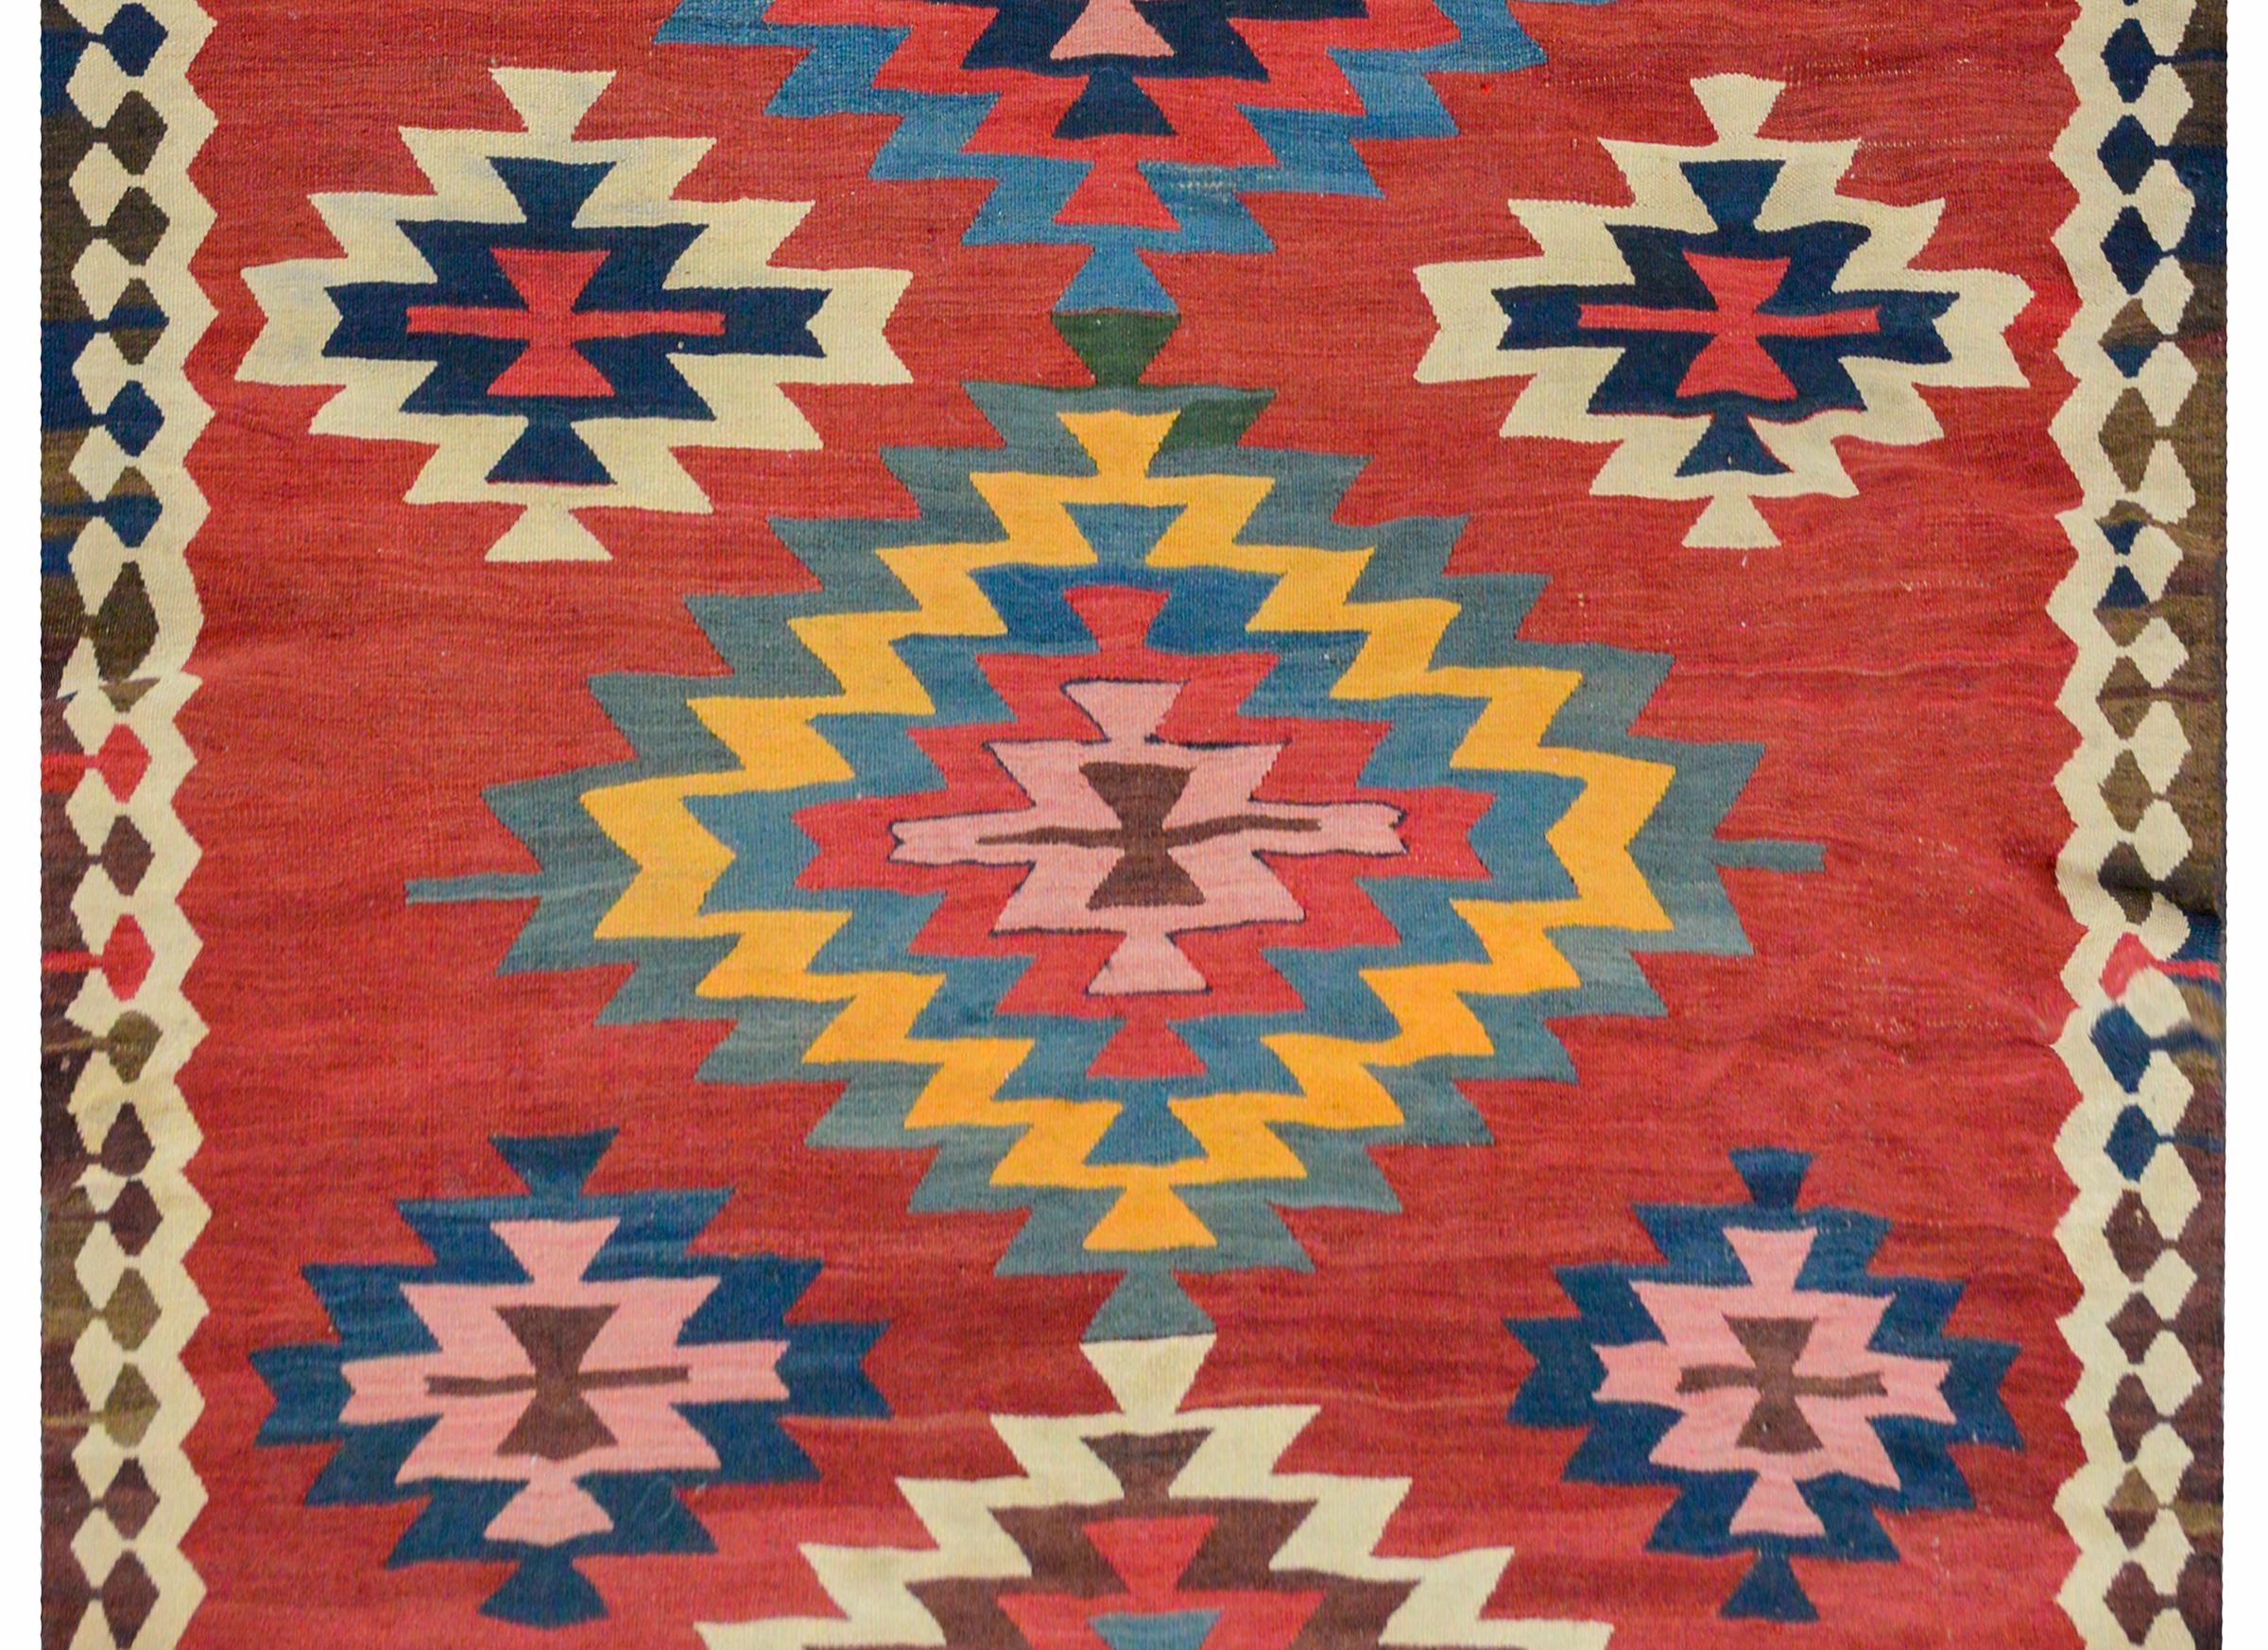 A wonderful early 20th century Persian Kilim runner with a bold pattern containing eight large stylized floral medallions amidst a field of smaller stylized flowers all on an abrash crimson background. The border is simple with a brown and white